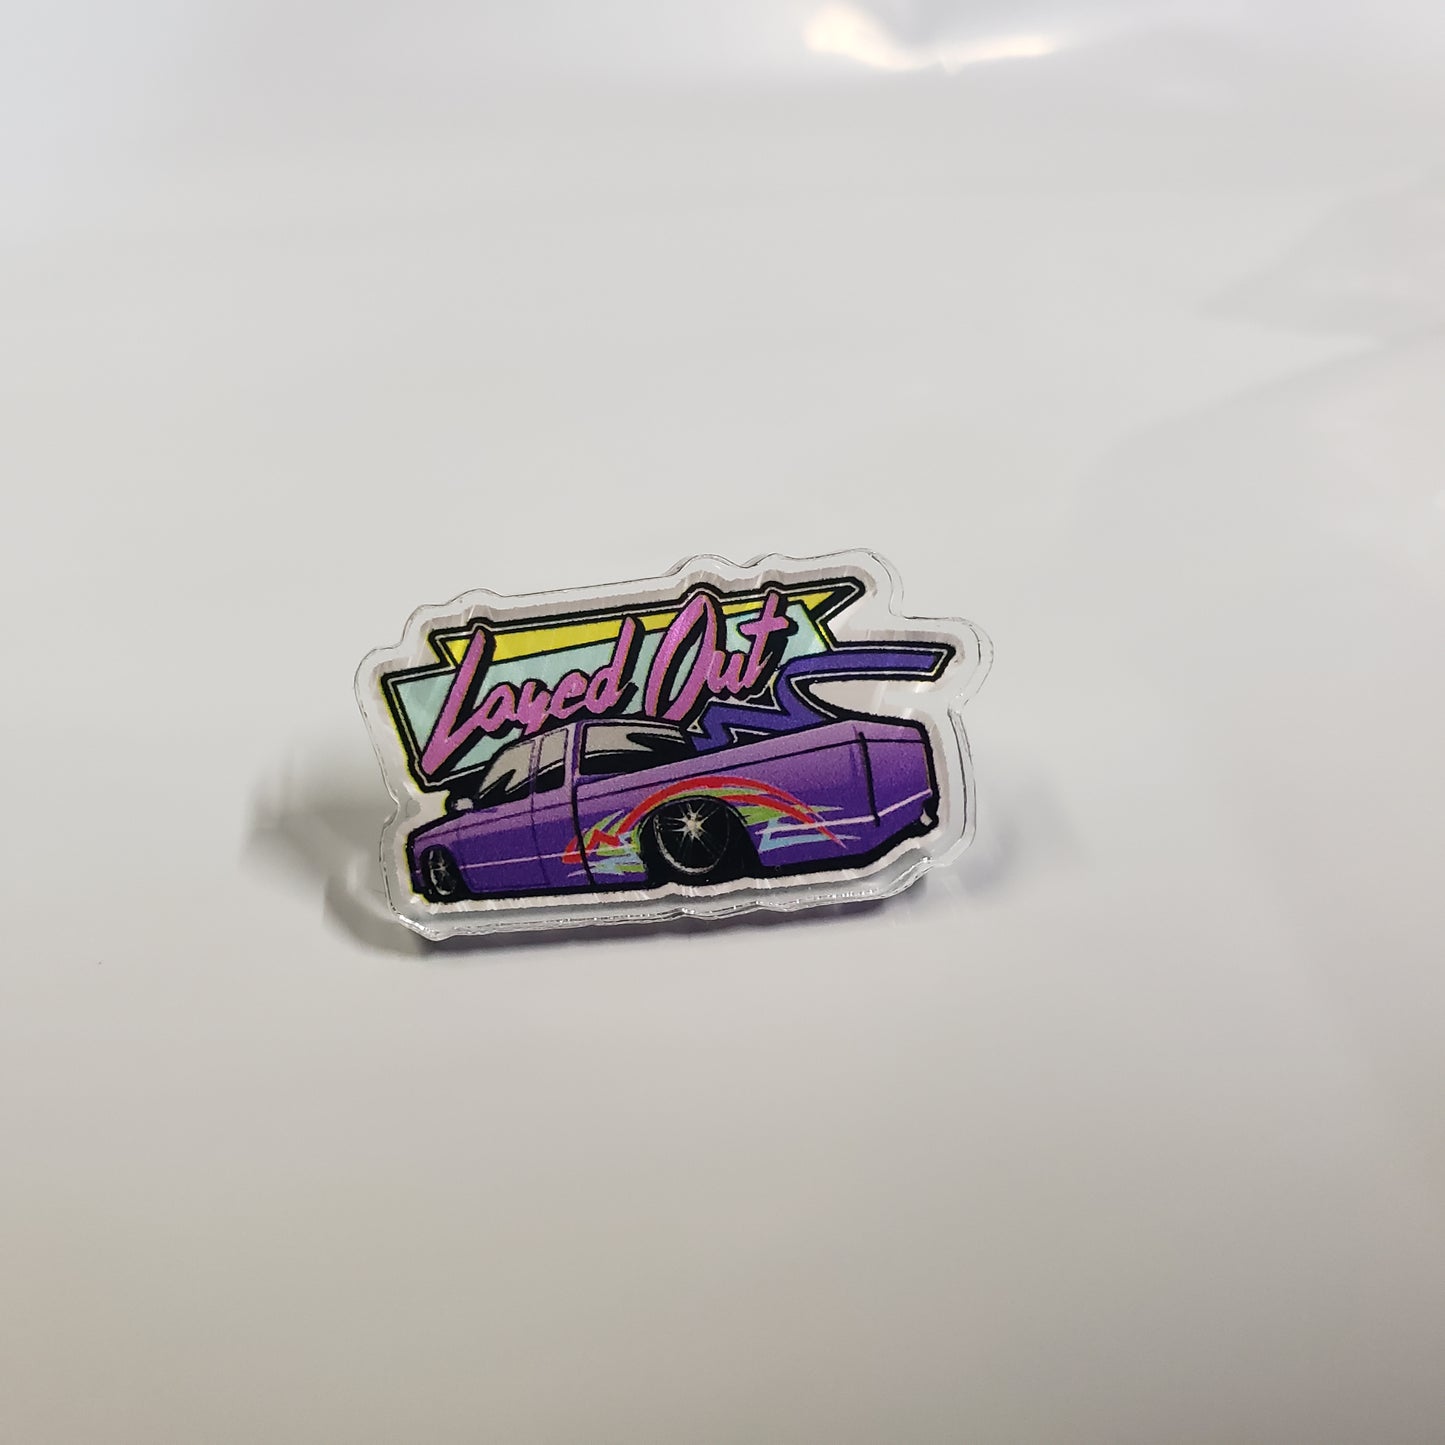 Lo Exotic Hat Pin